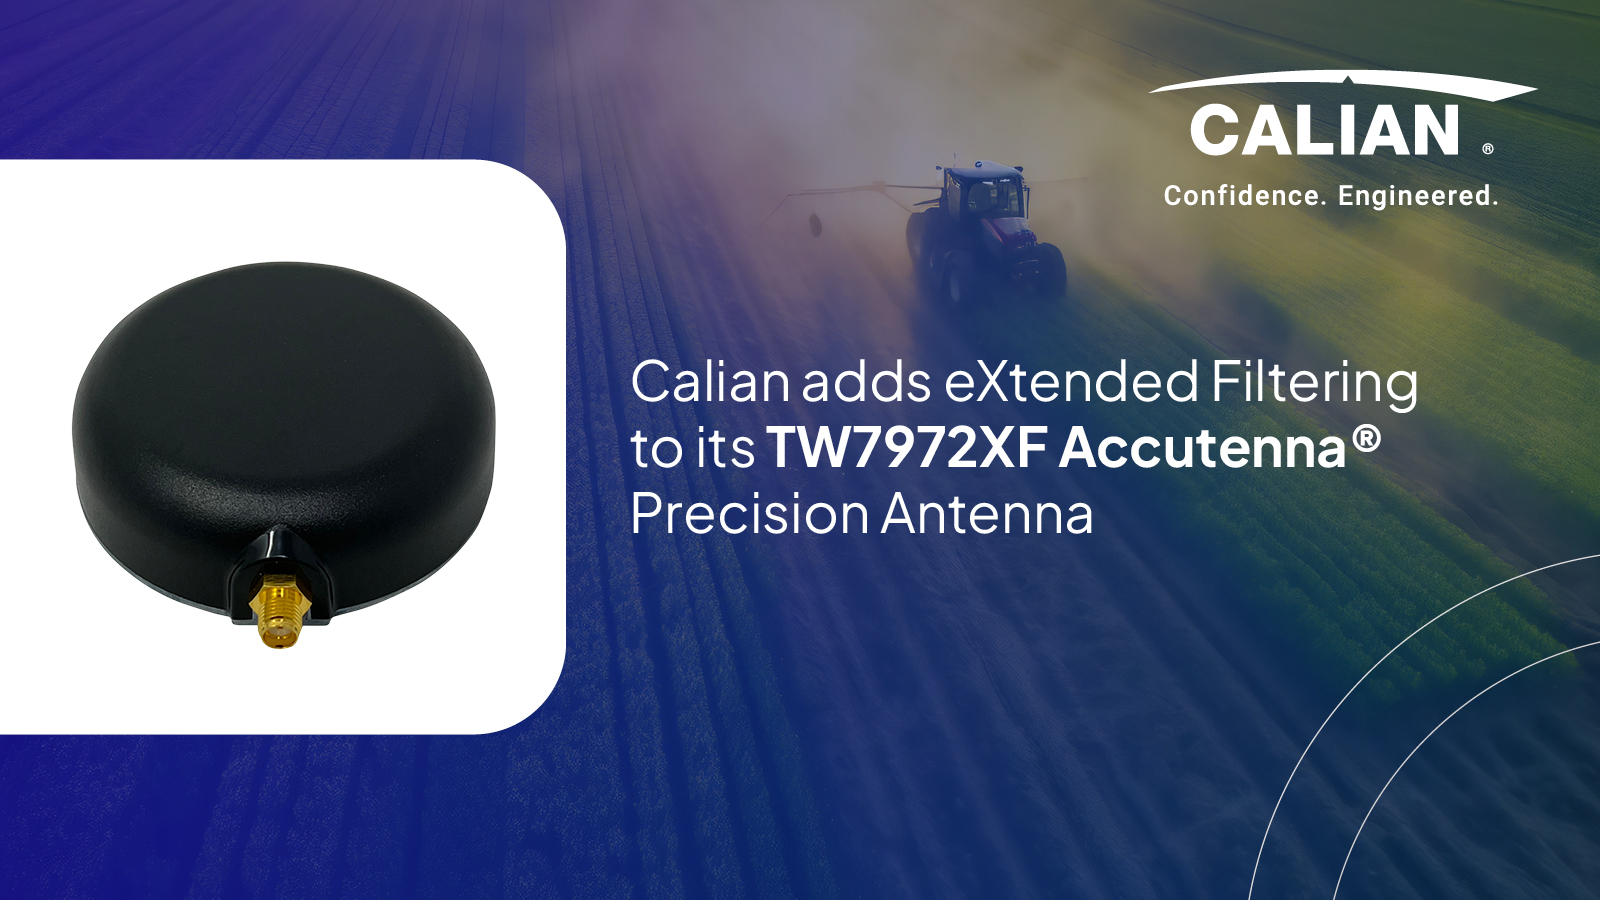 Calian adds eXtended Filtering to its TW7972XF Accutenna® Precision Antenna